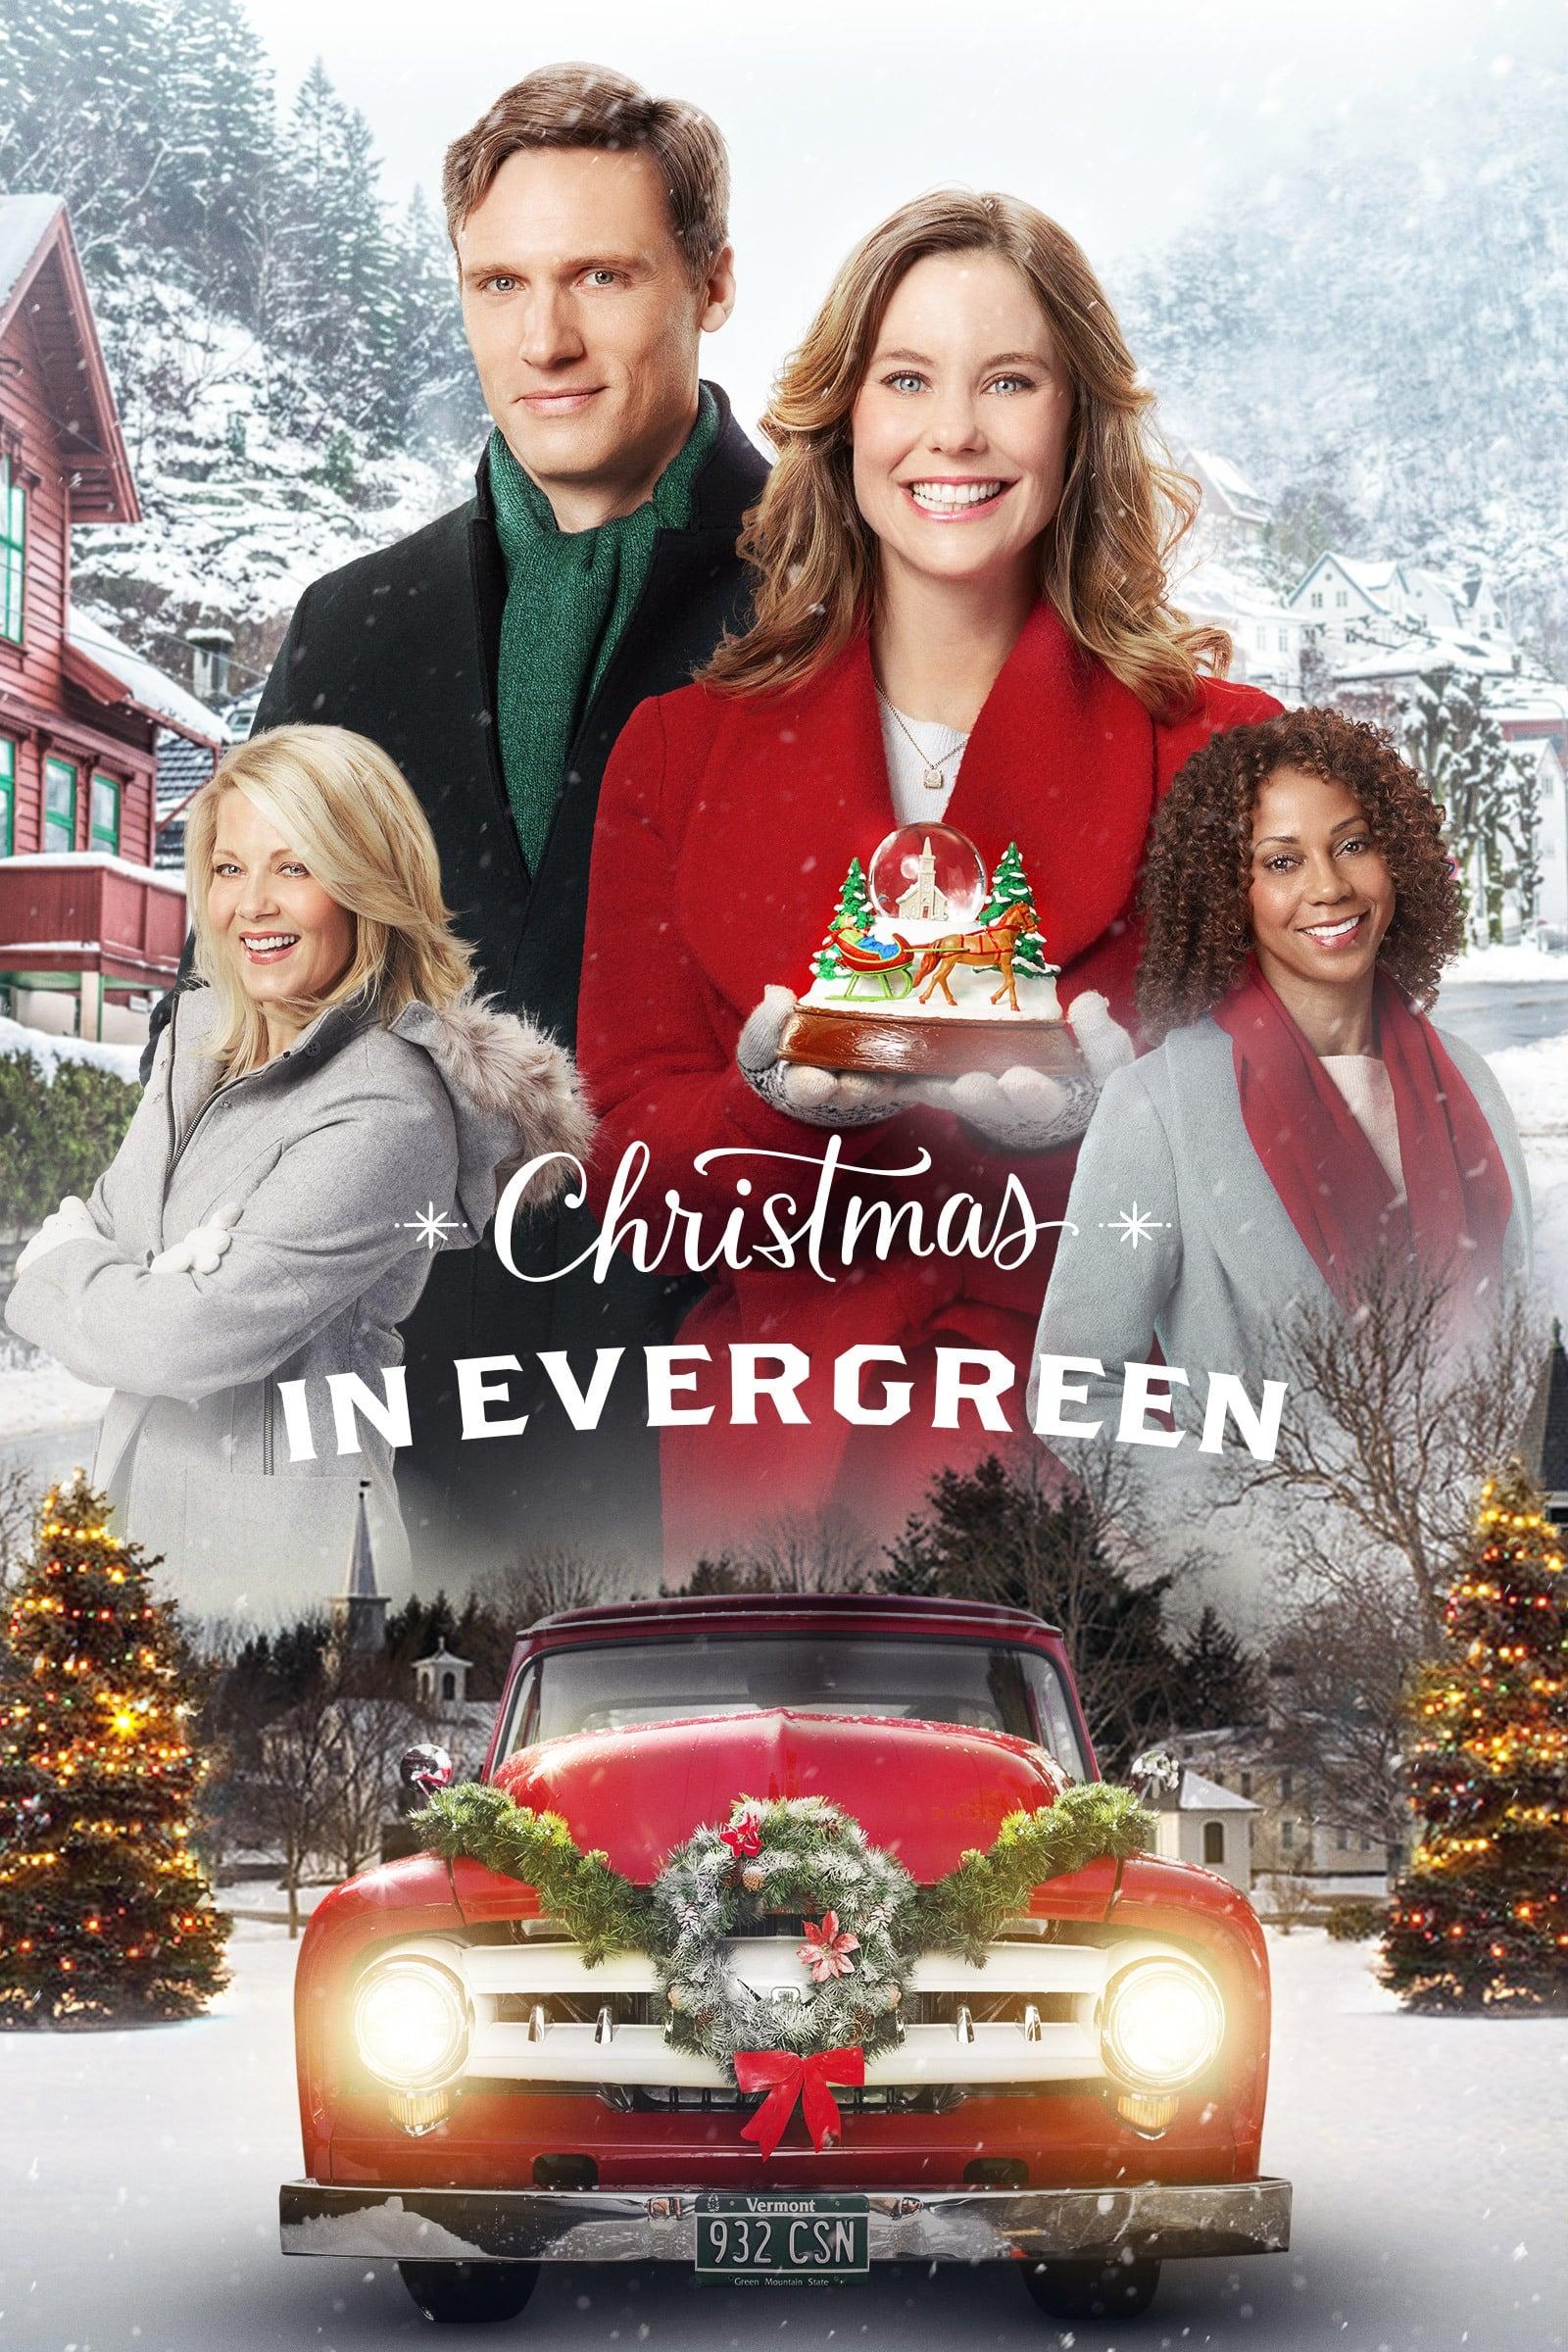 Christmas in Evergreen poster